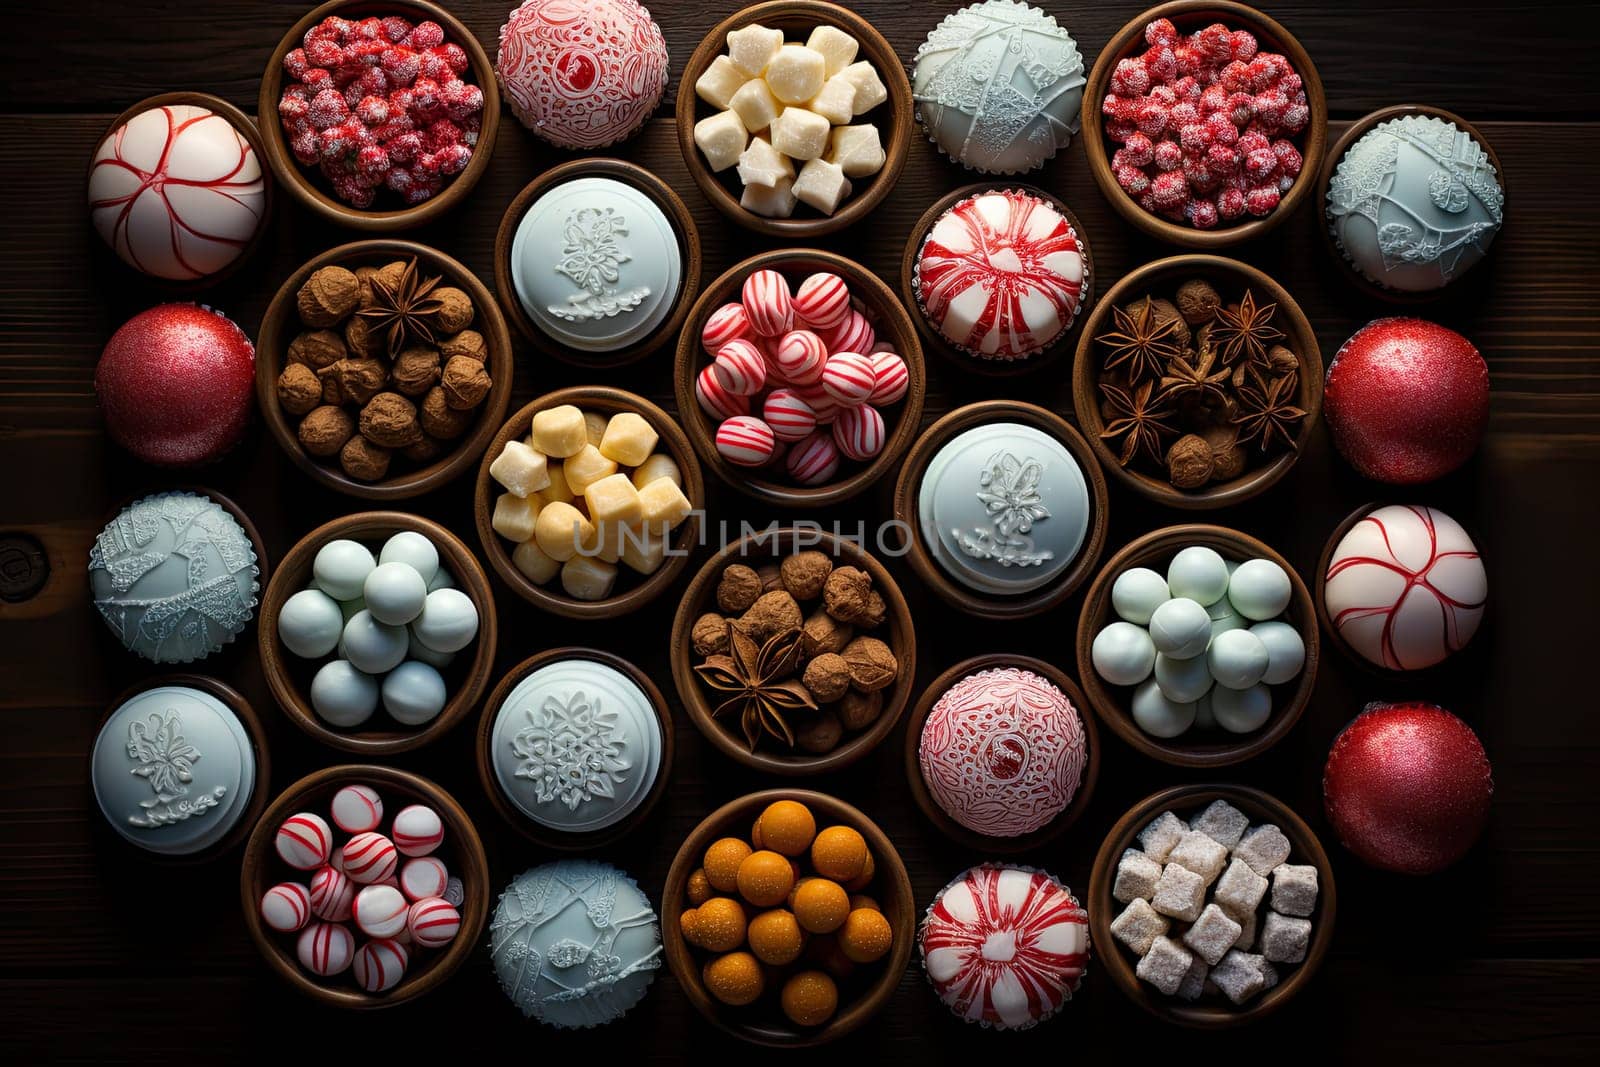 A Table Overflowing with a Variety of Colorful Cupcakes and Sweet Candies